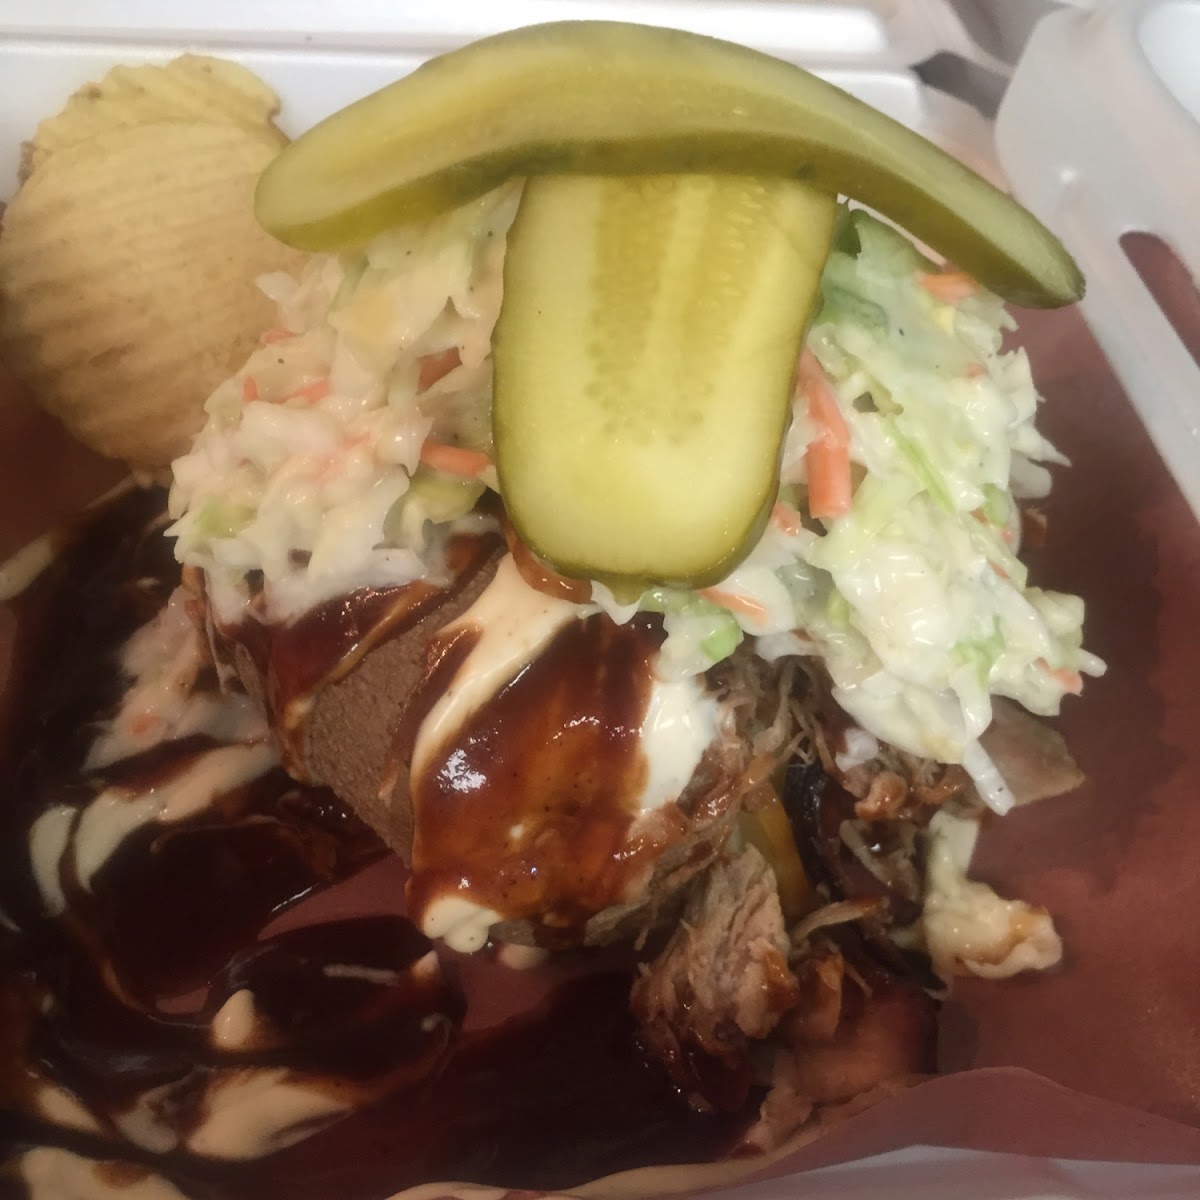 "Pulled Potato " with mayo, smoked cheddar, brisket, pork or turkey, GlutenFree BBQ sauce( request upon ordering), coleslaw and pickles. Get in my mouth!!!